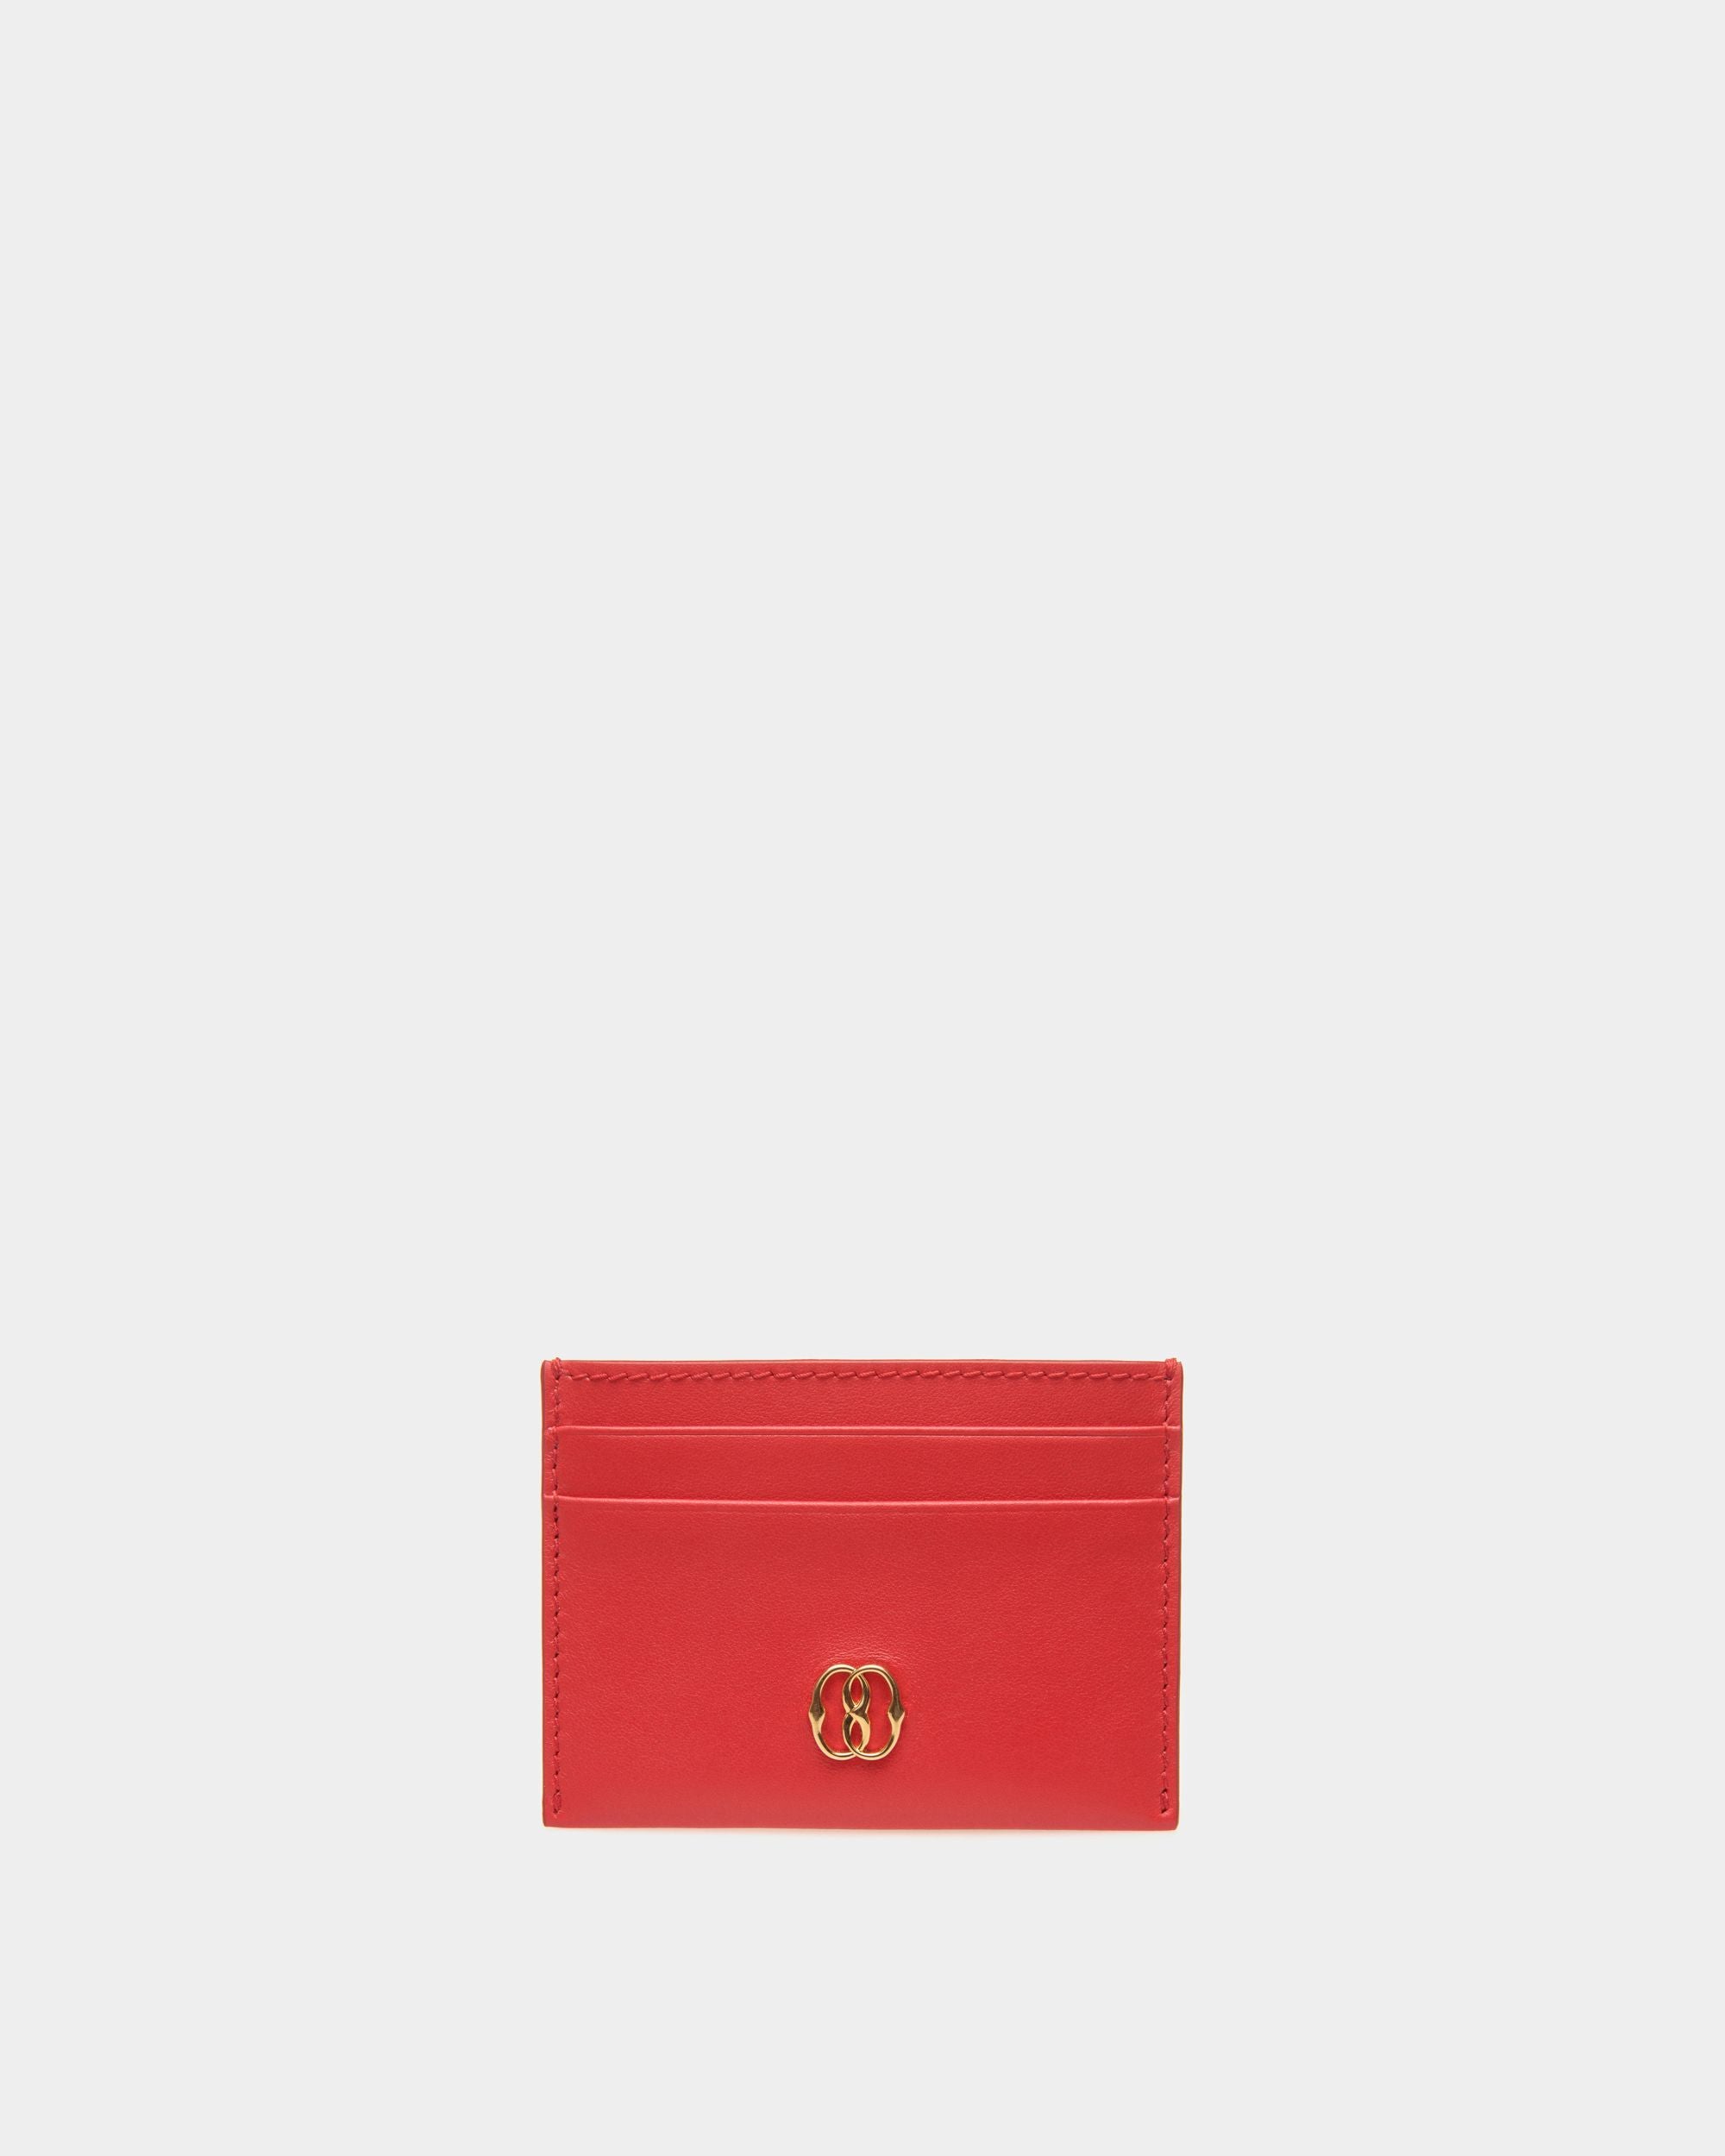 Emblem | Women's Card Holder in Red Leather | Bally | Still Life Front